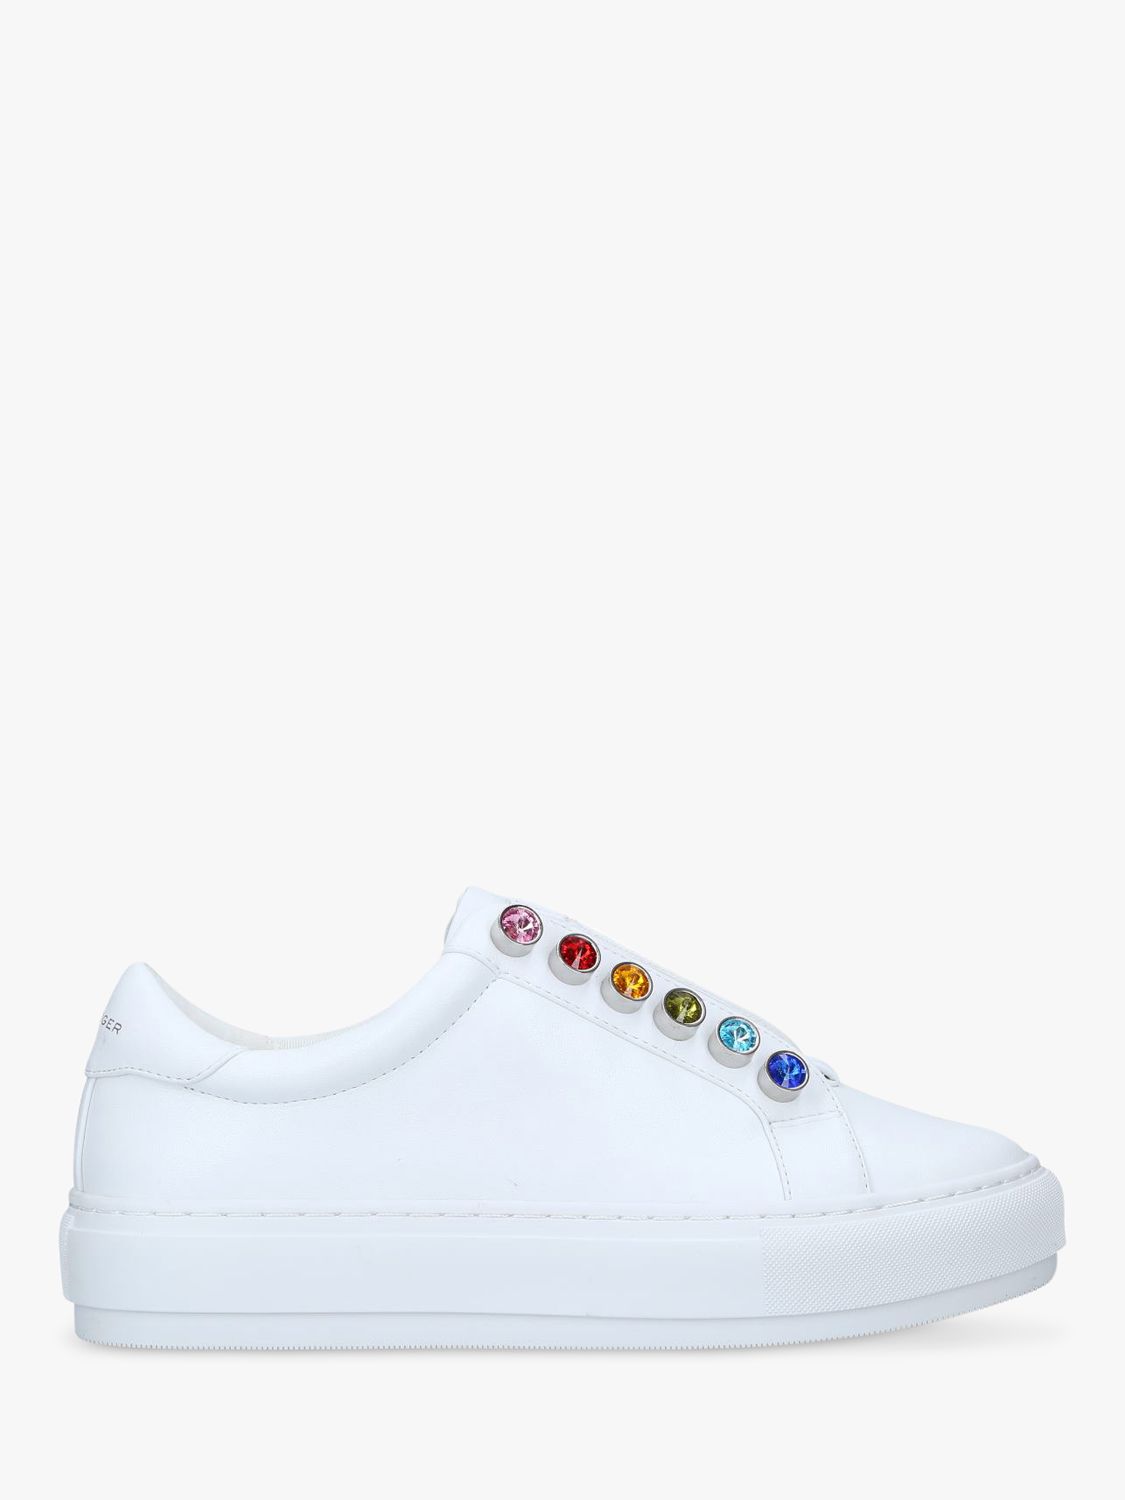 Buy Kurt Geiger London Liviah Low Top Leather Trainers, White/Multi Online at johnlewis.com